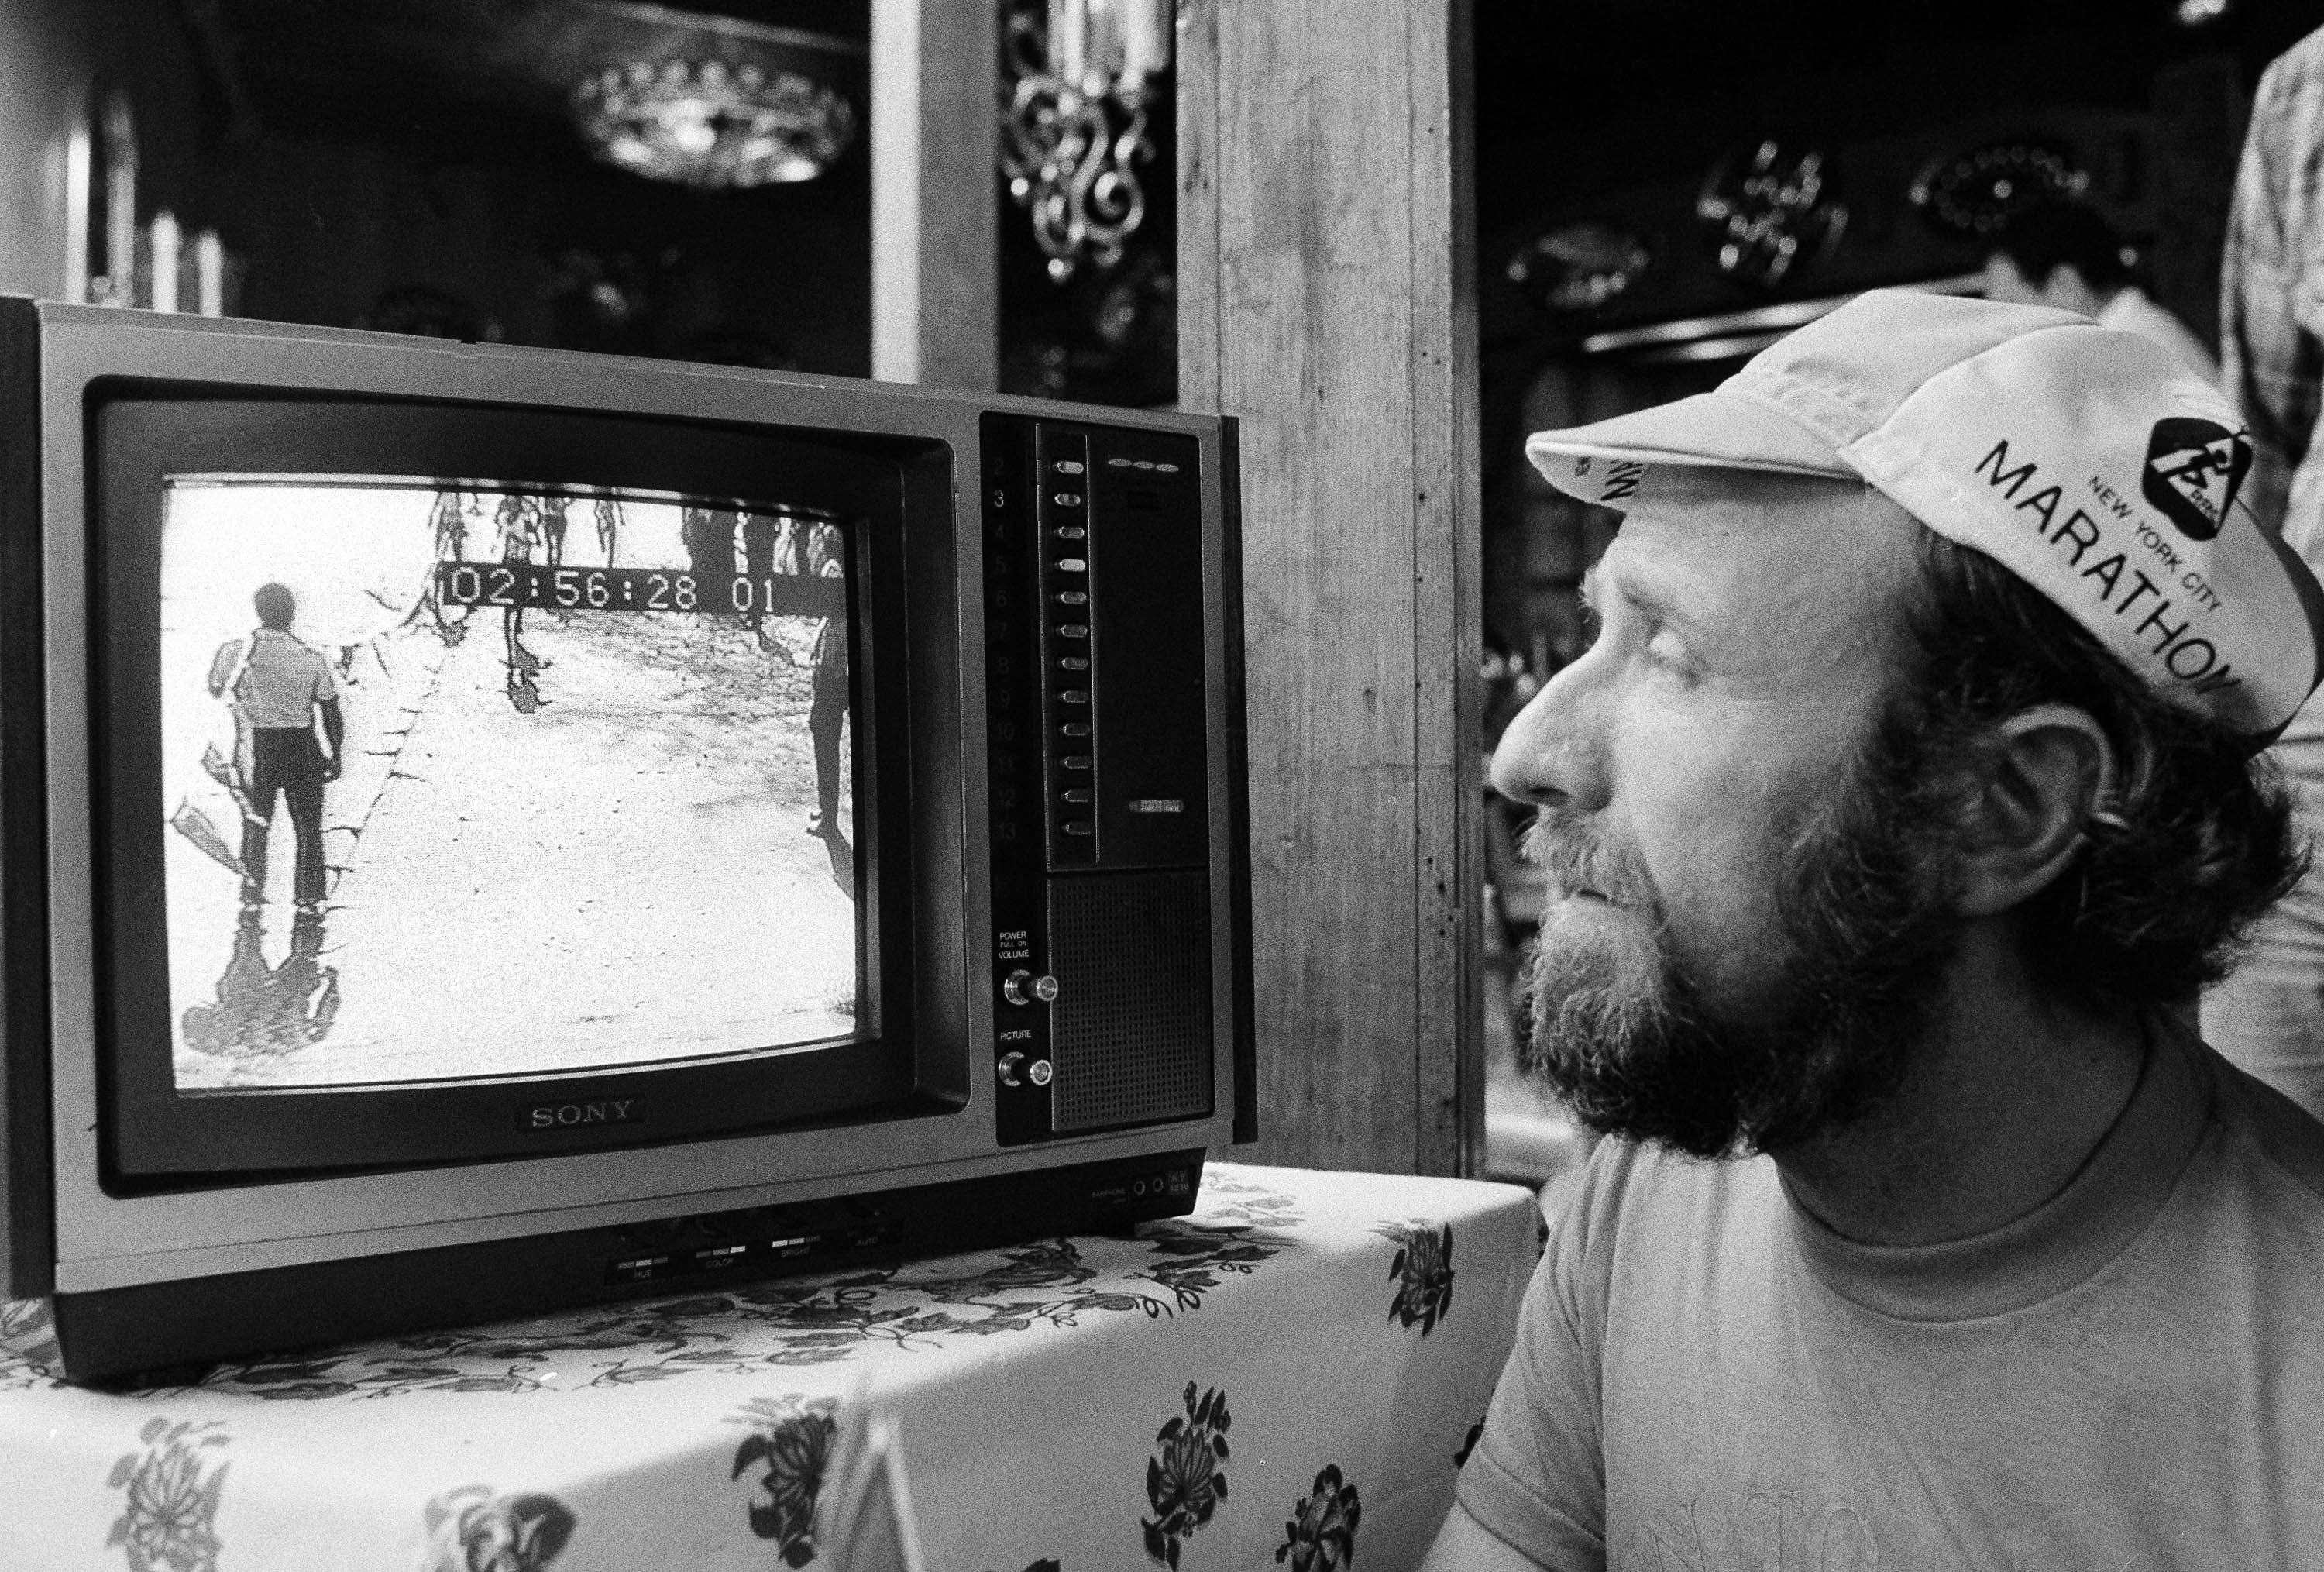 Man watches runners on a small TV